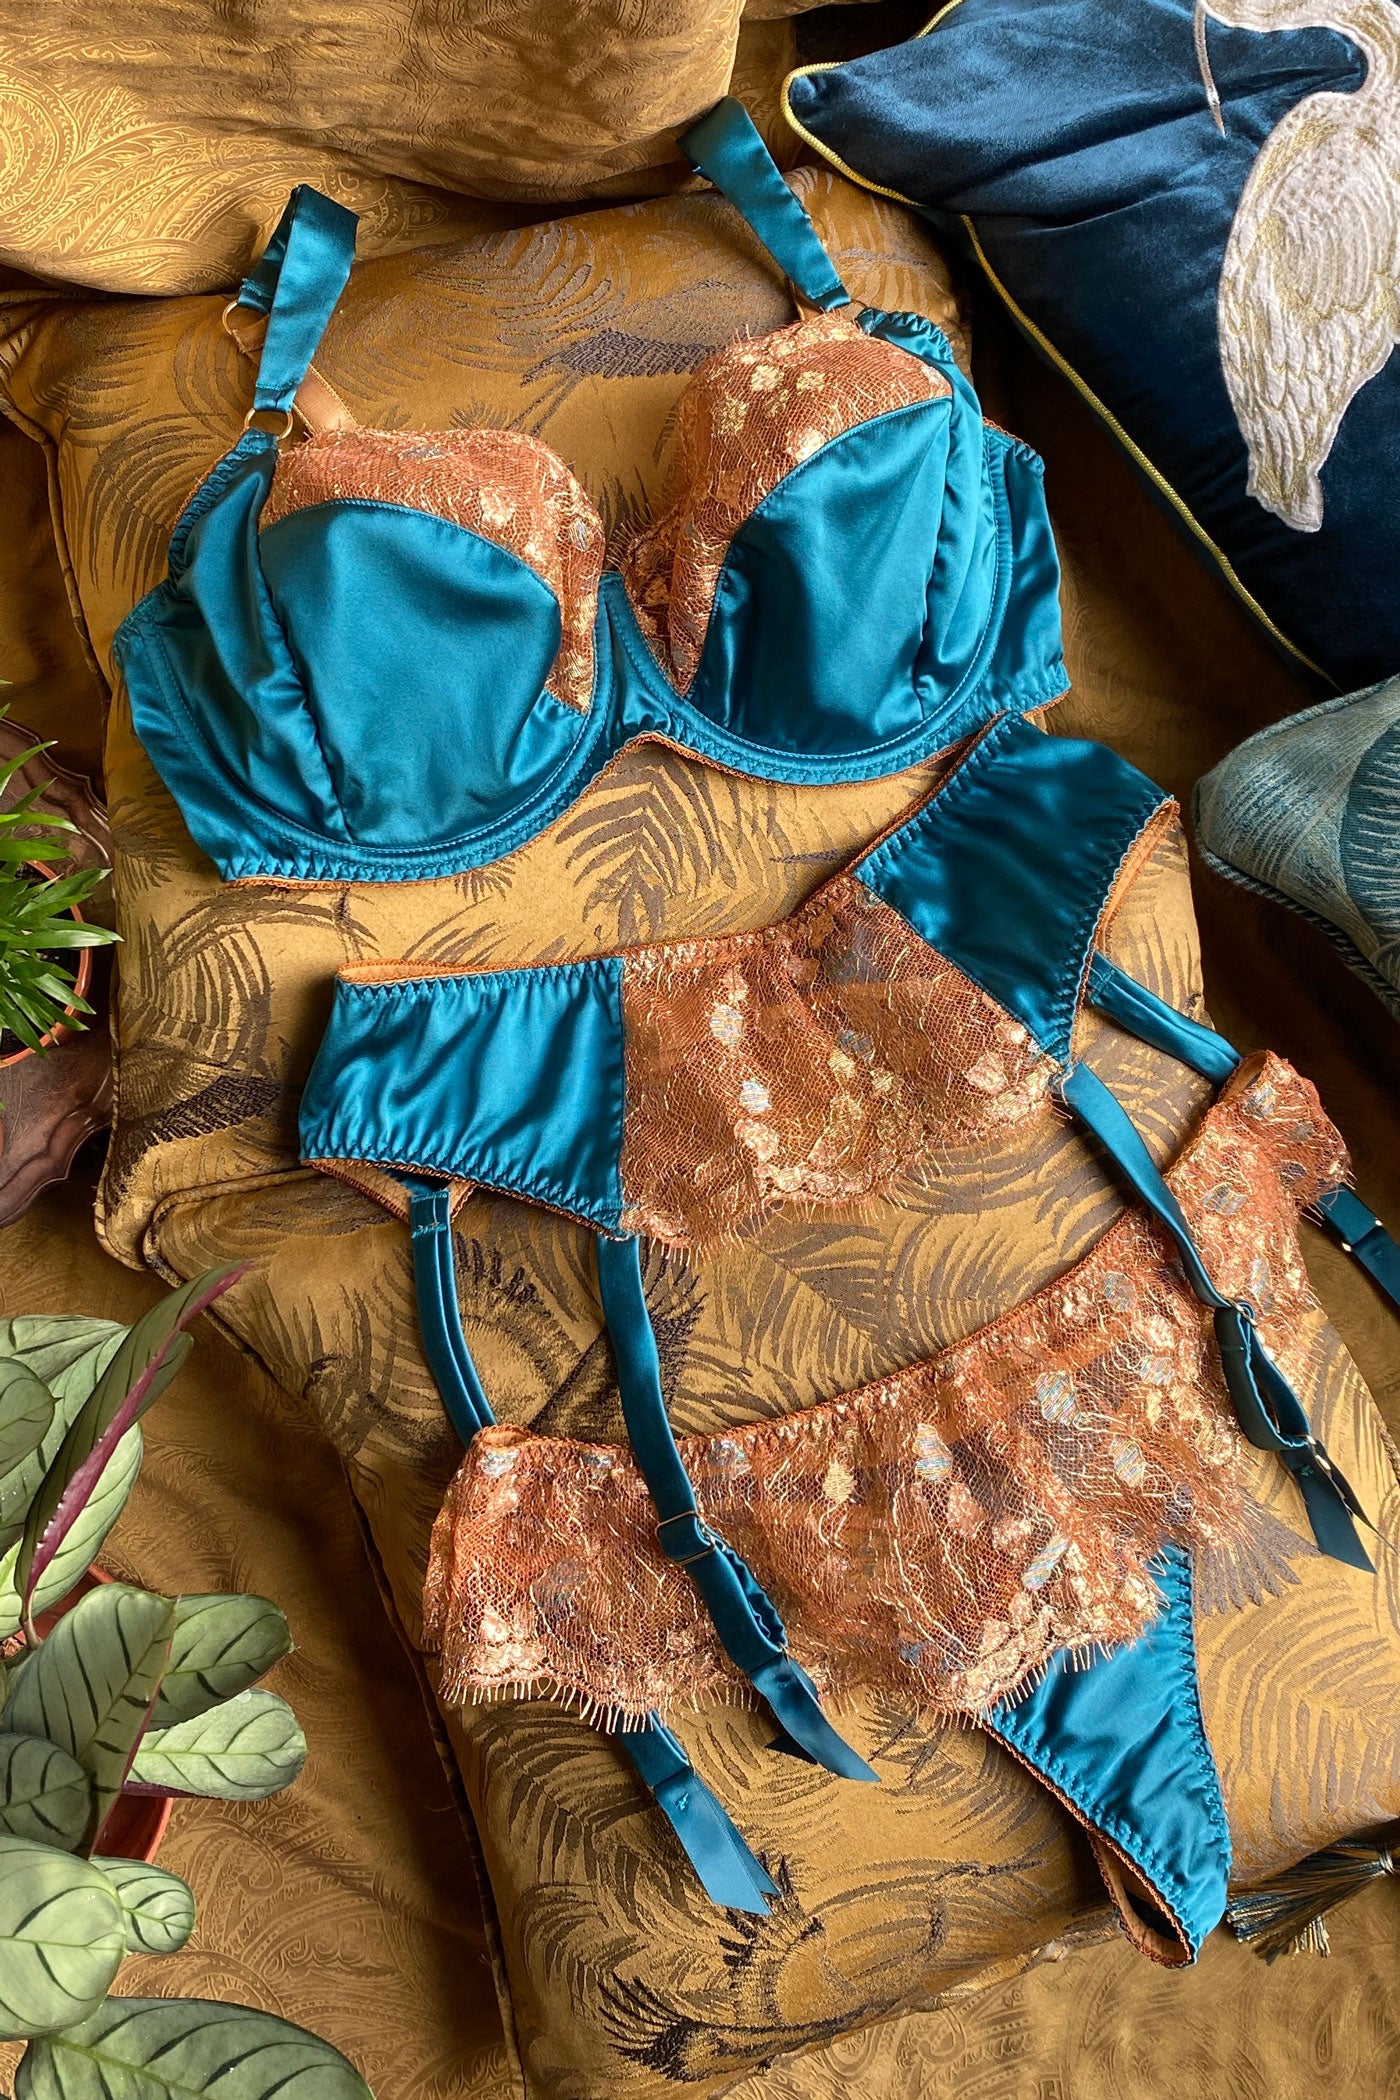 Silk and lace lingerie set in turquoise and gold with garter belt, DD+ bra and thong laid on gold cushions